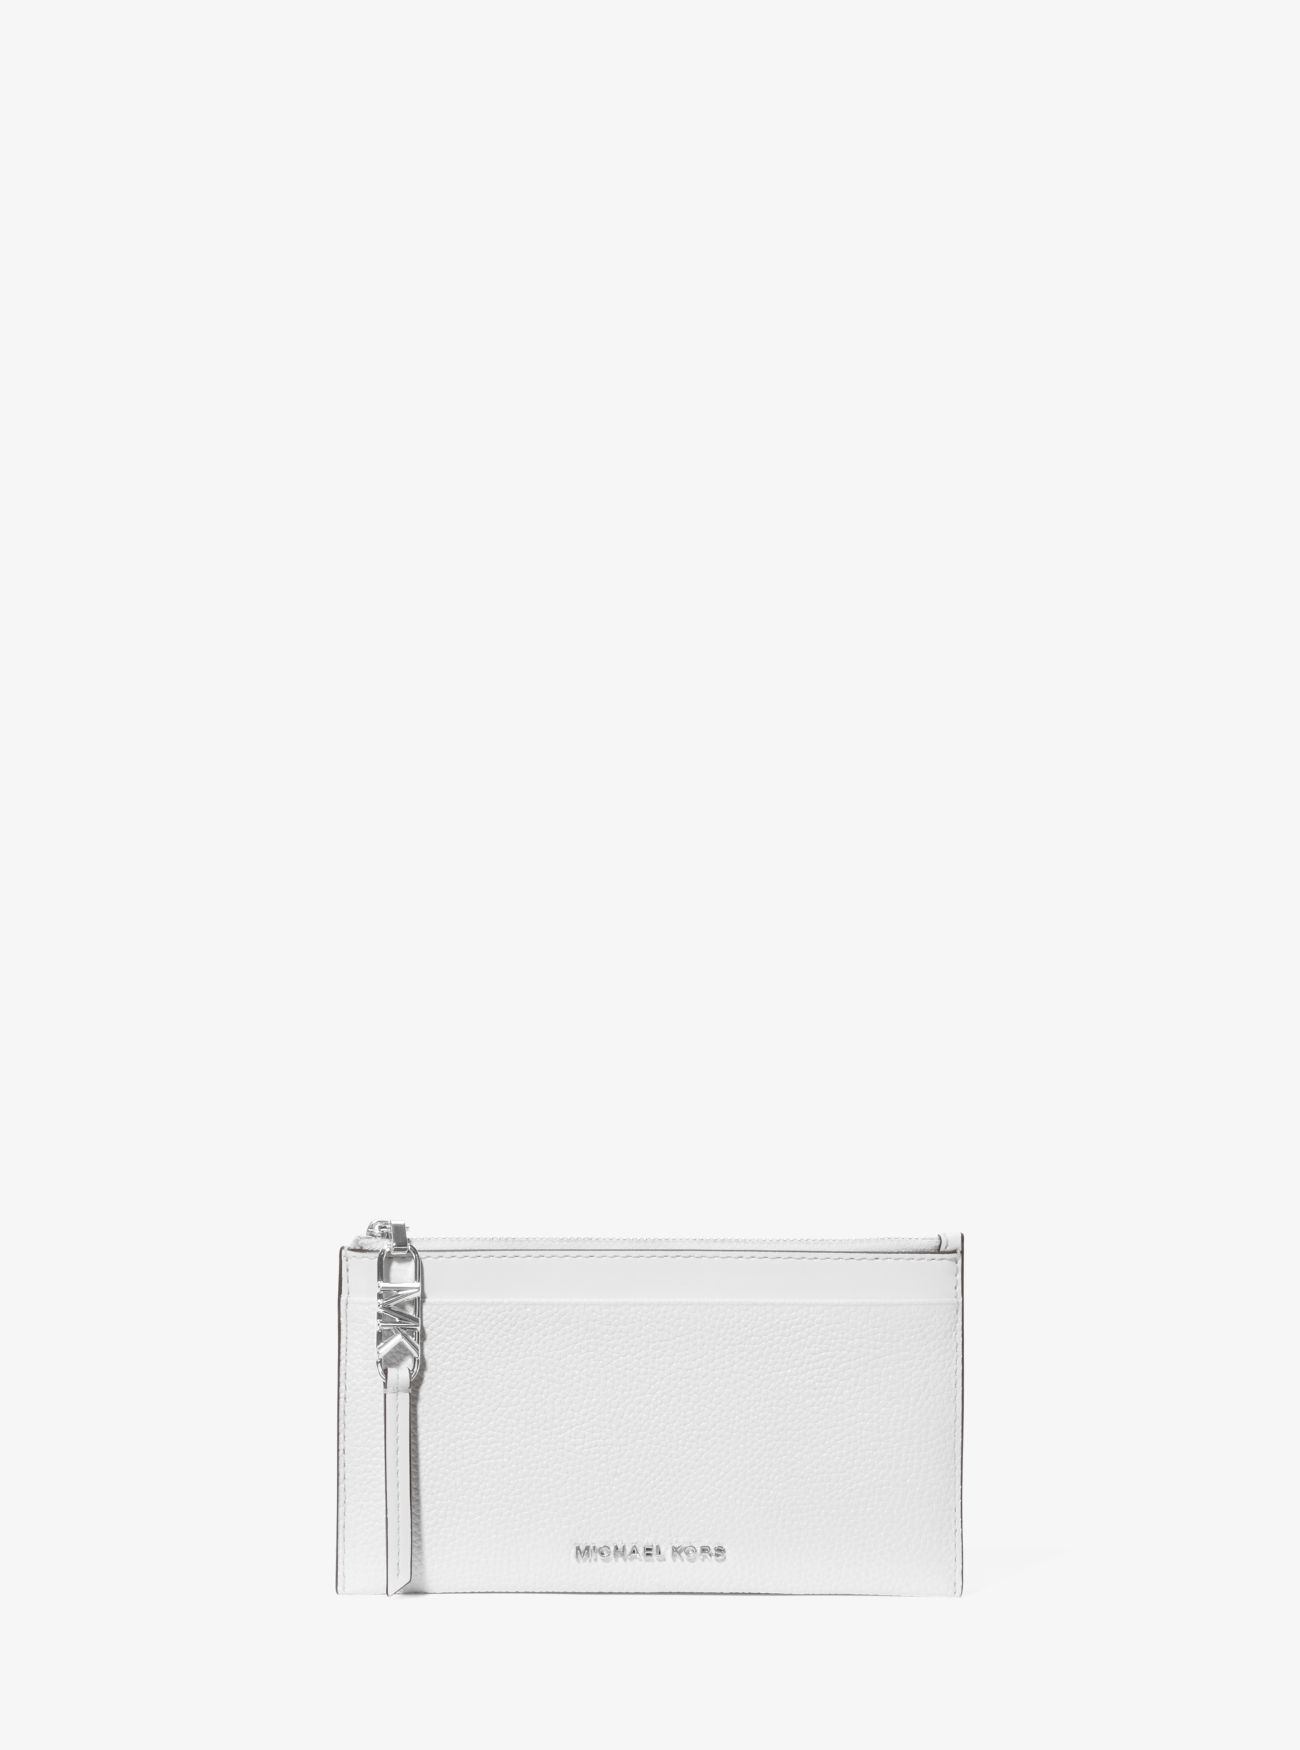 MK Empire Large Pebbled Leather Card Case - White - Michael Kors